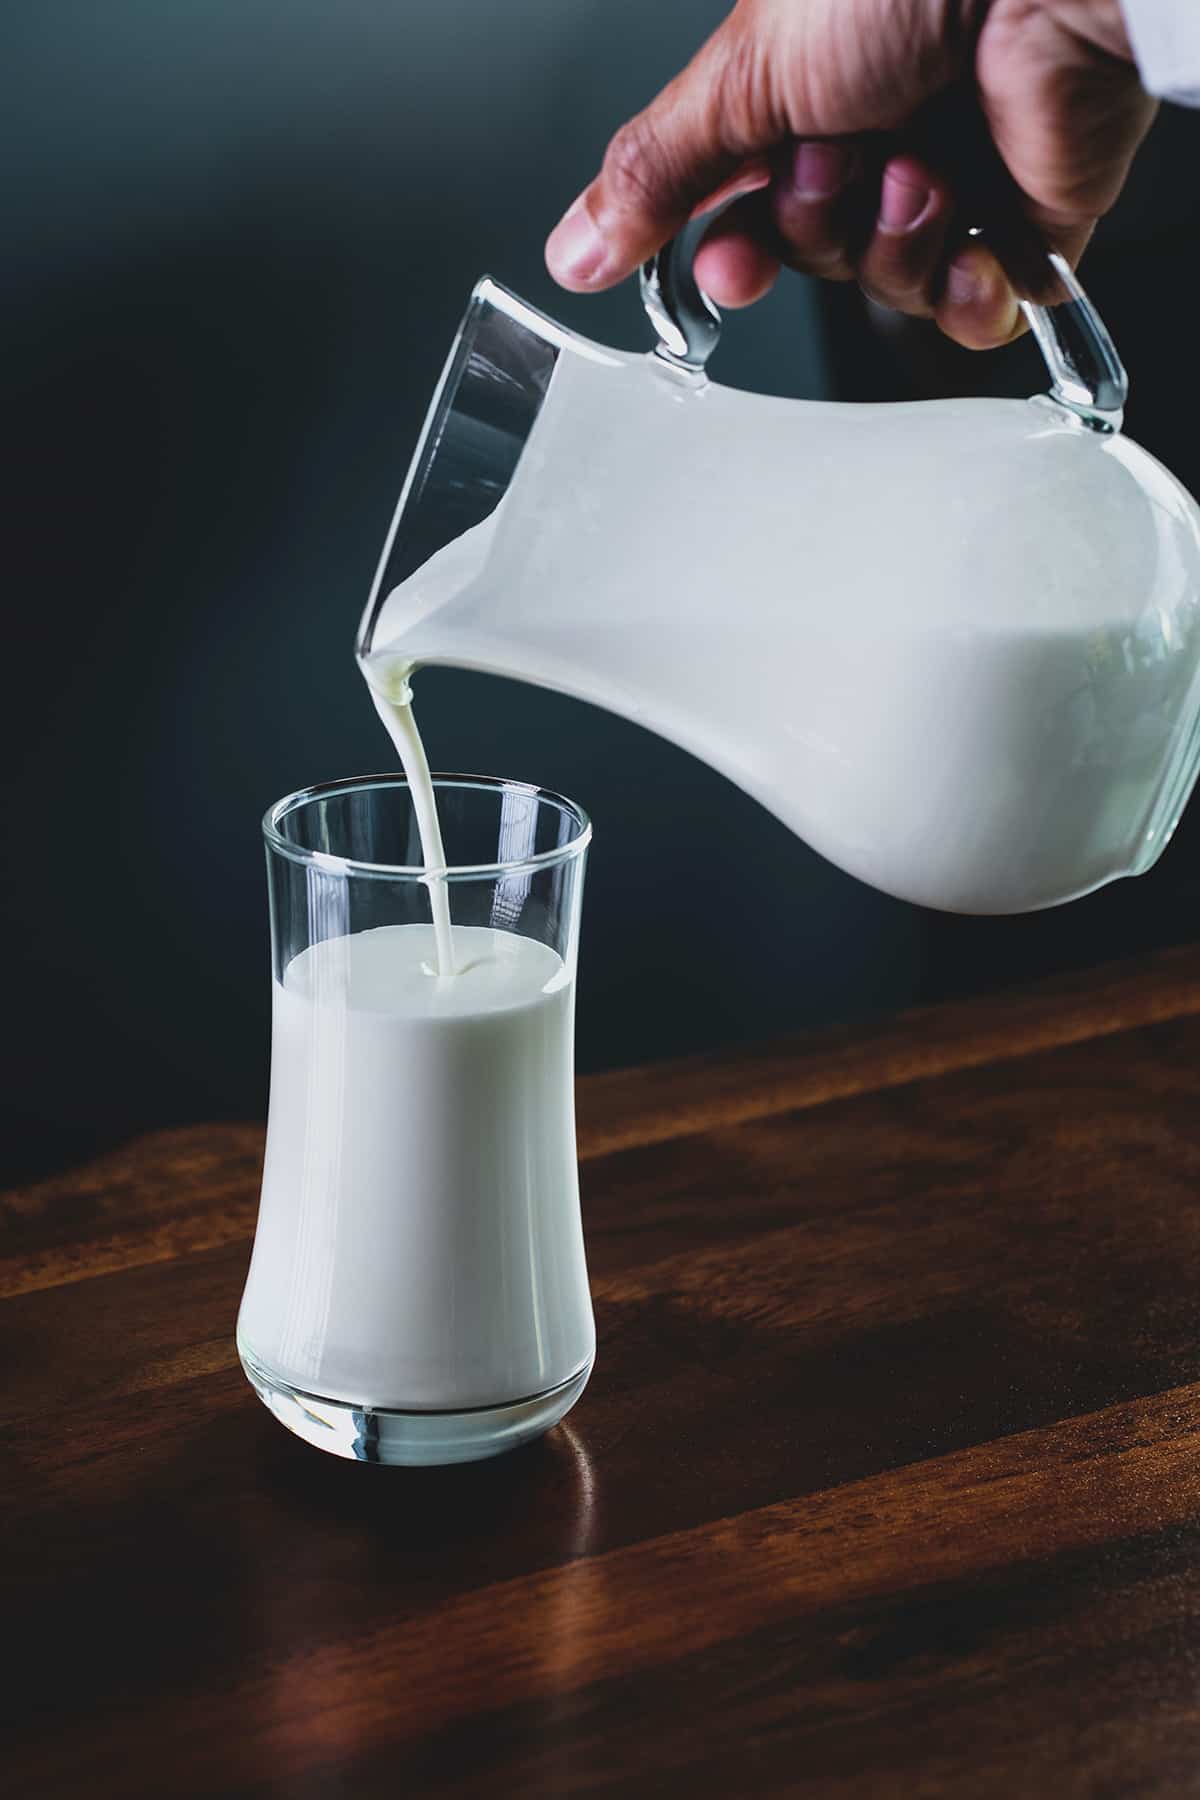 Heavy cream being poured into a glass.